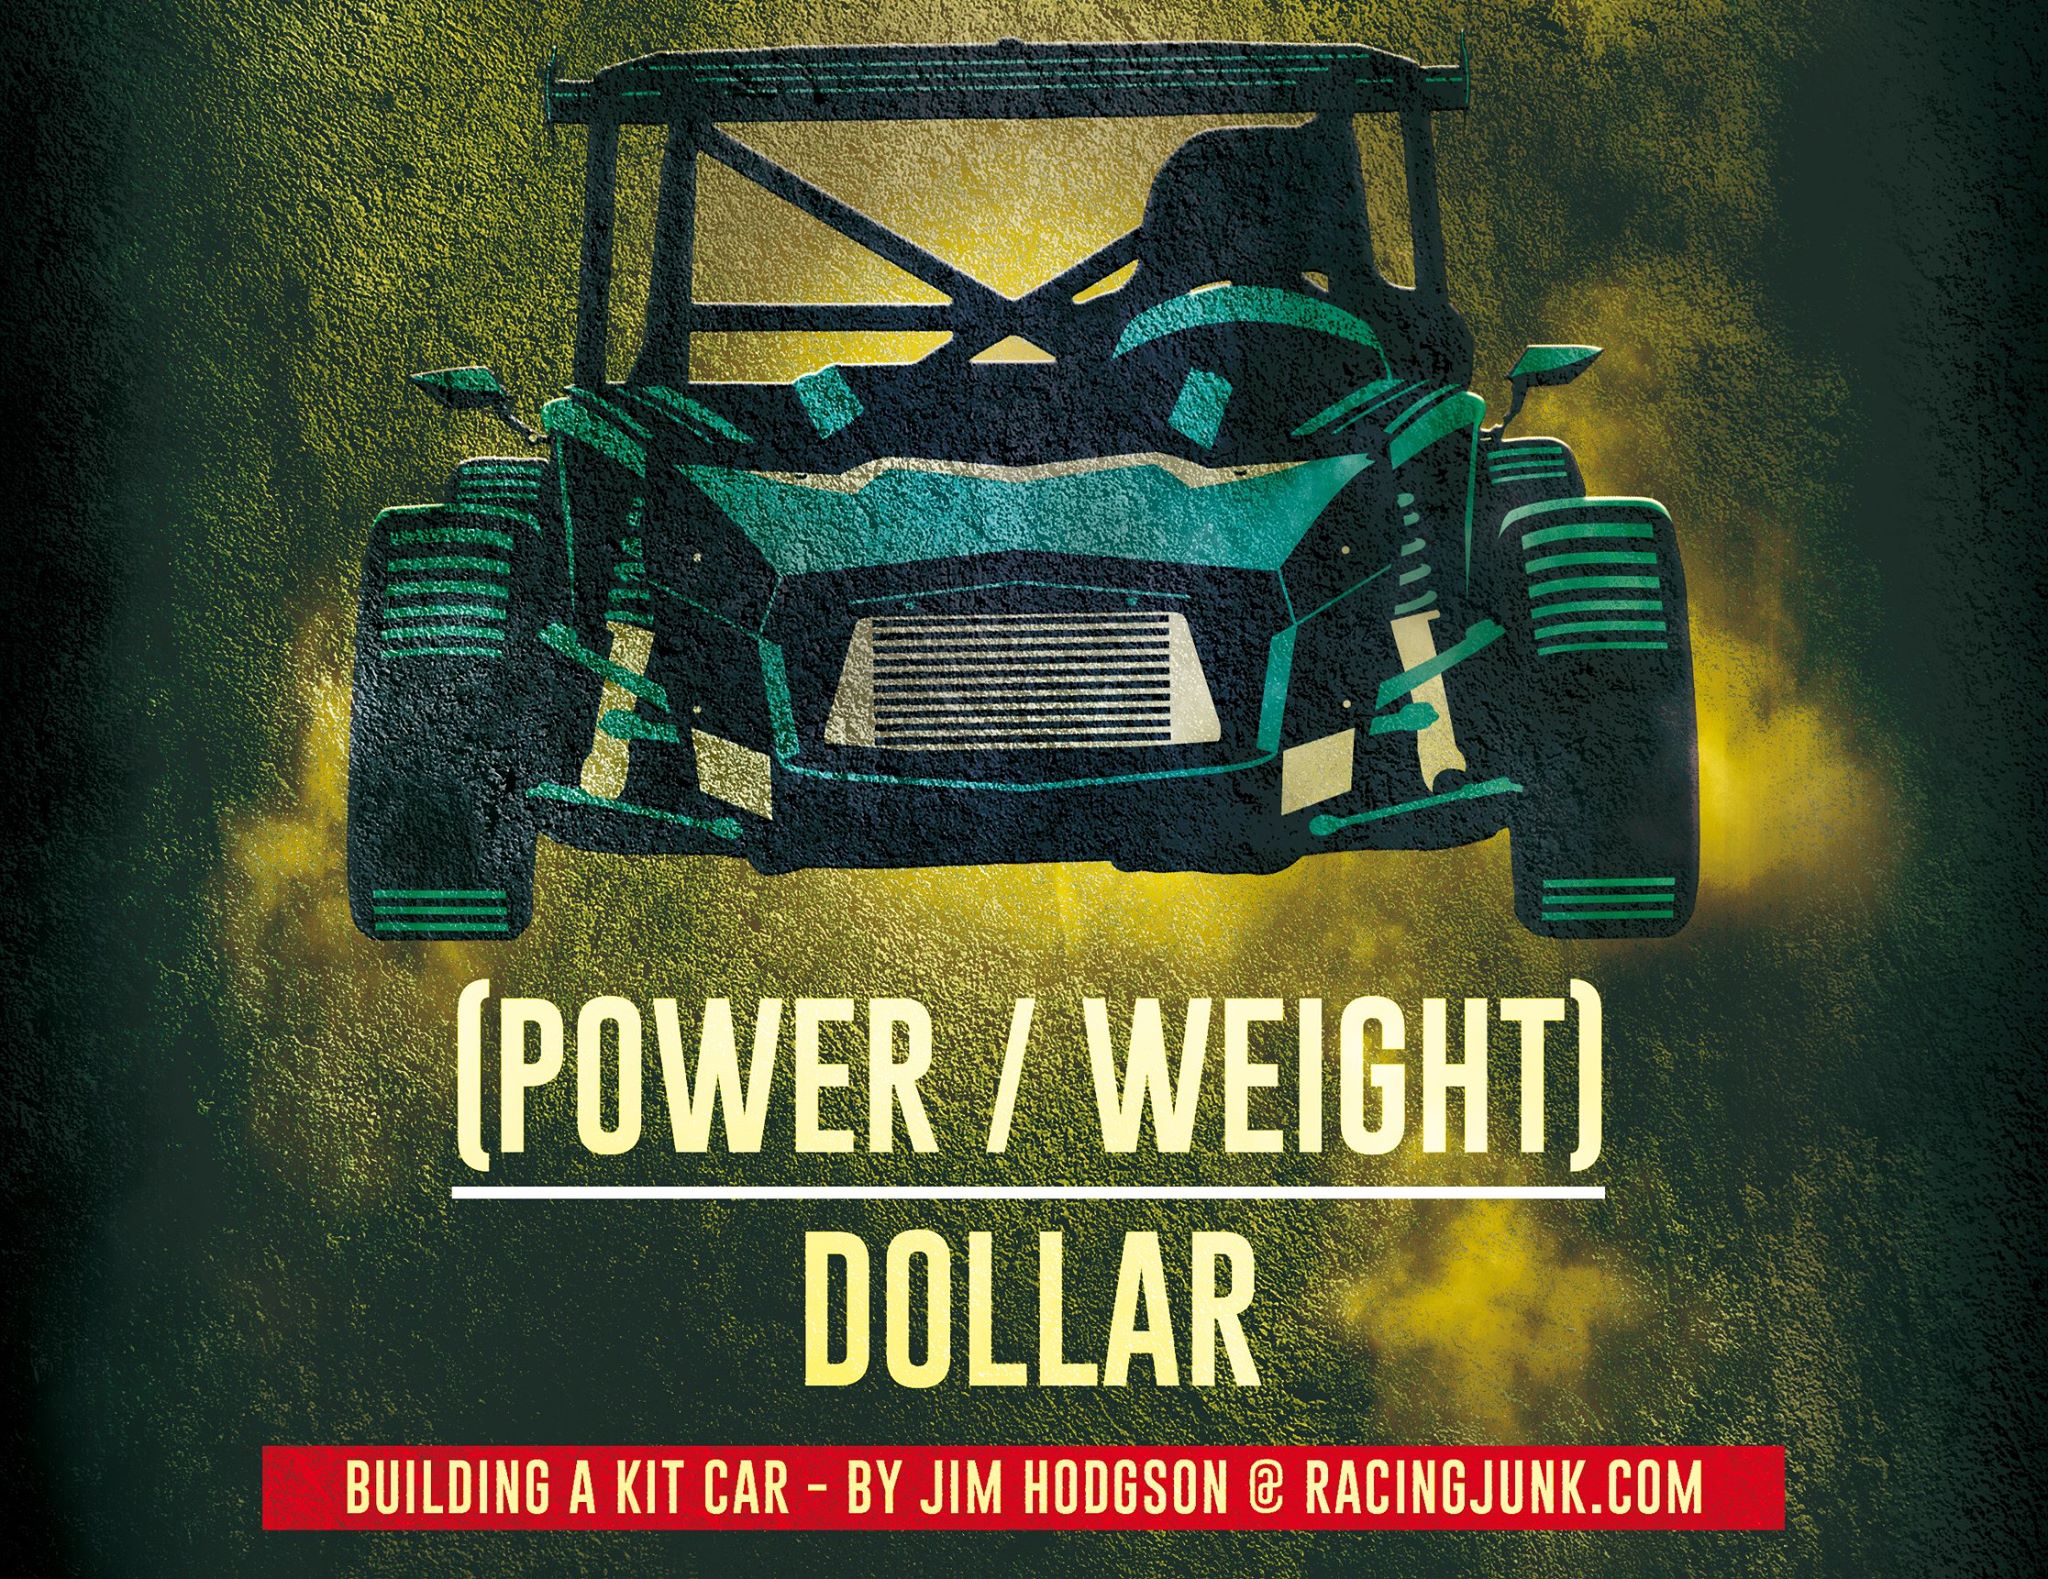 Power to weight to dollar